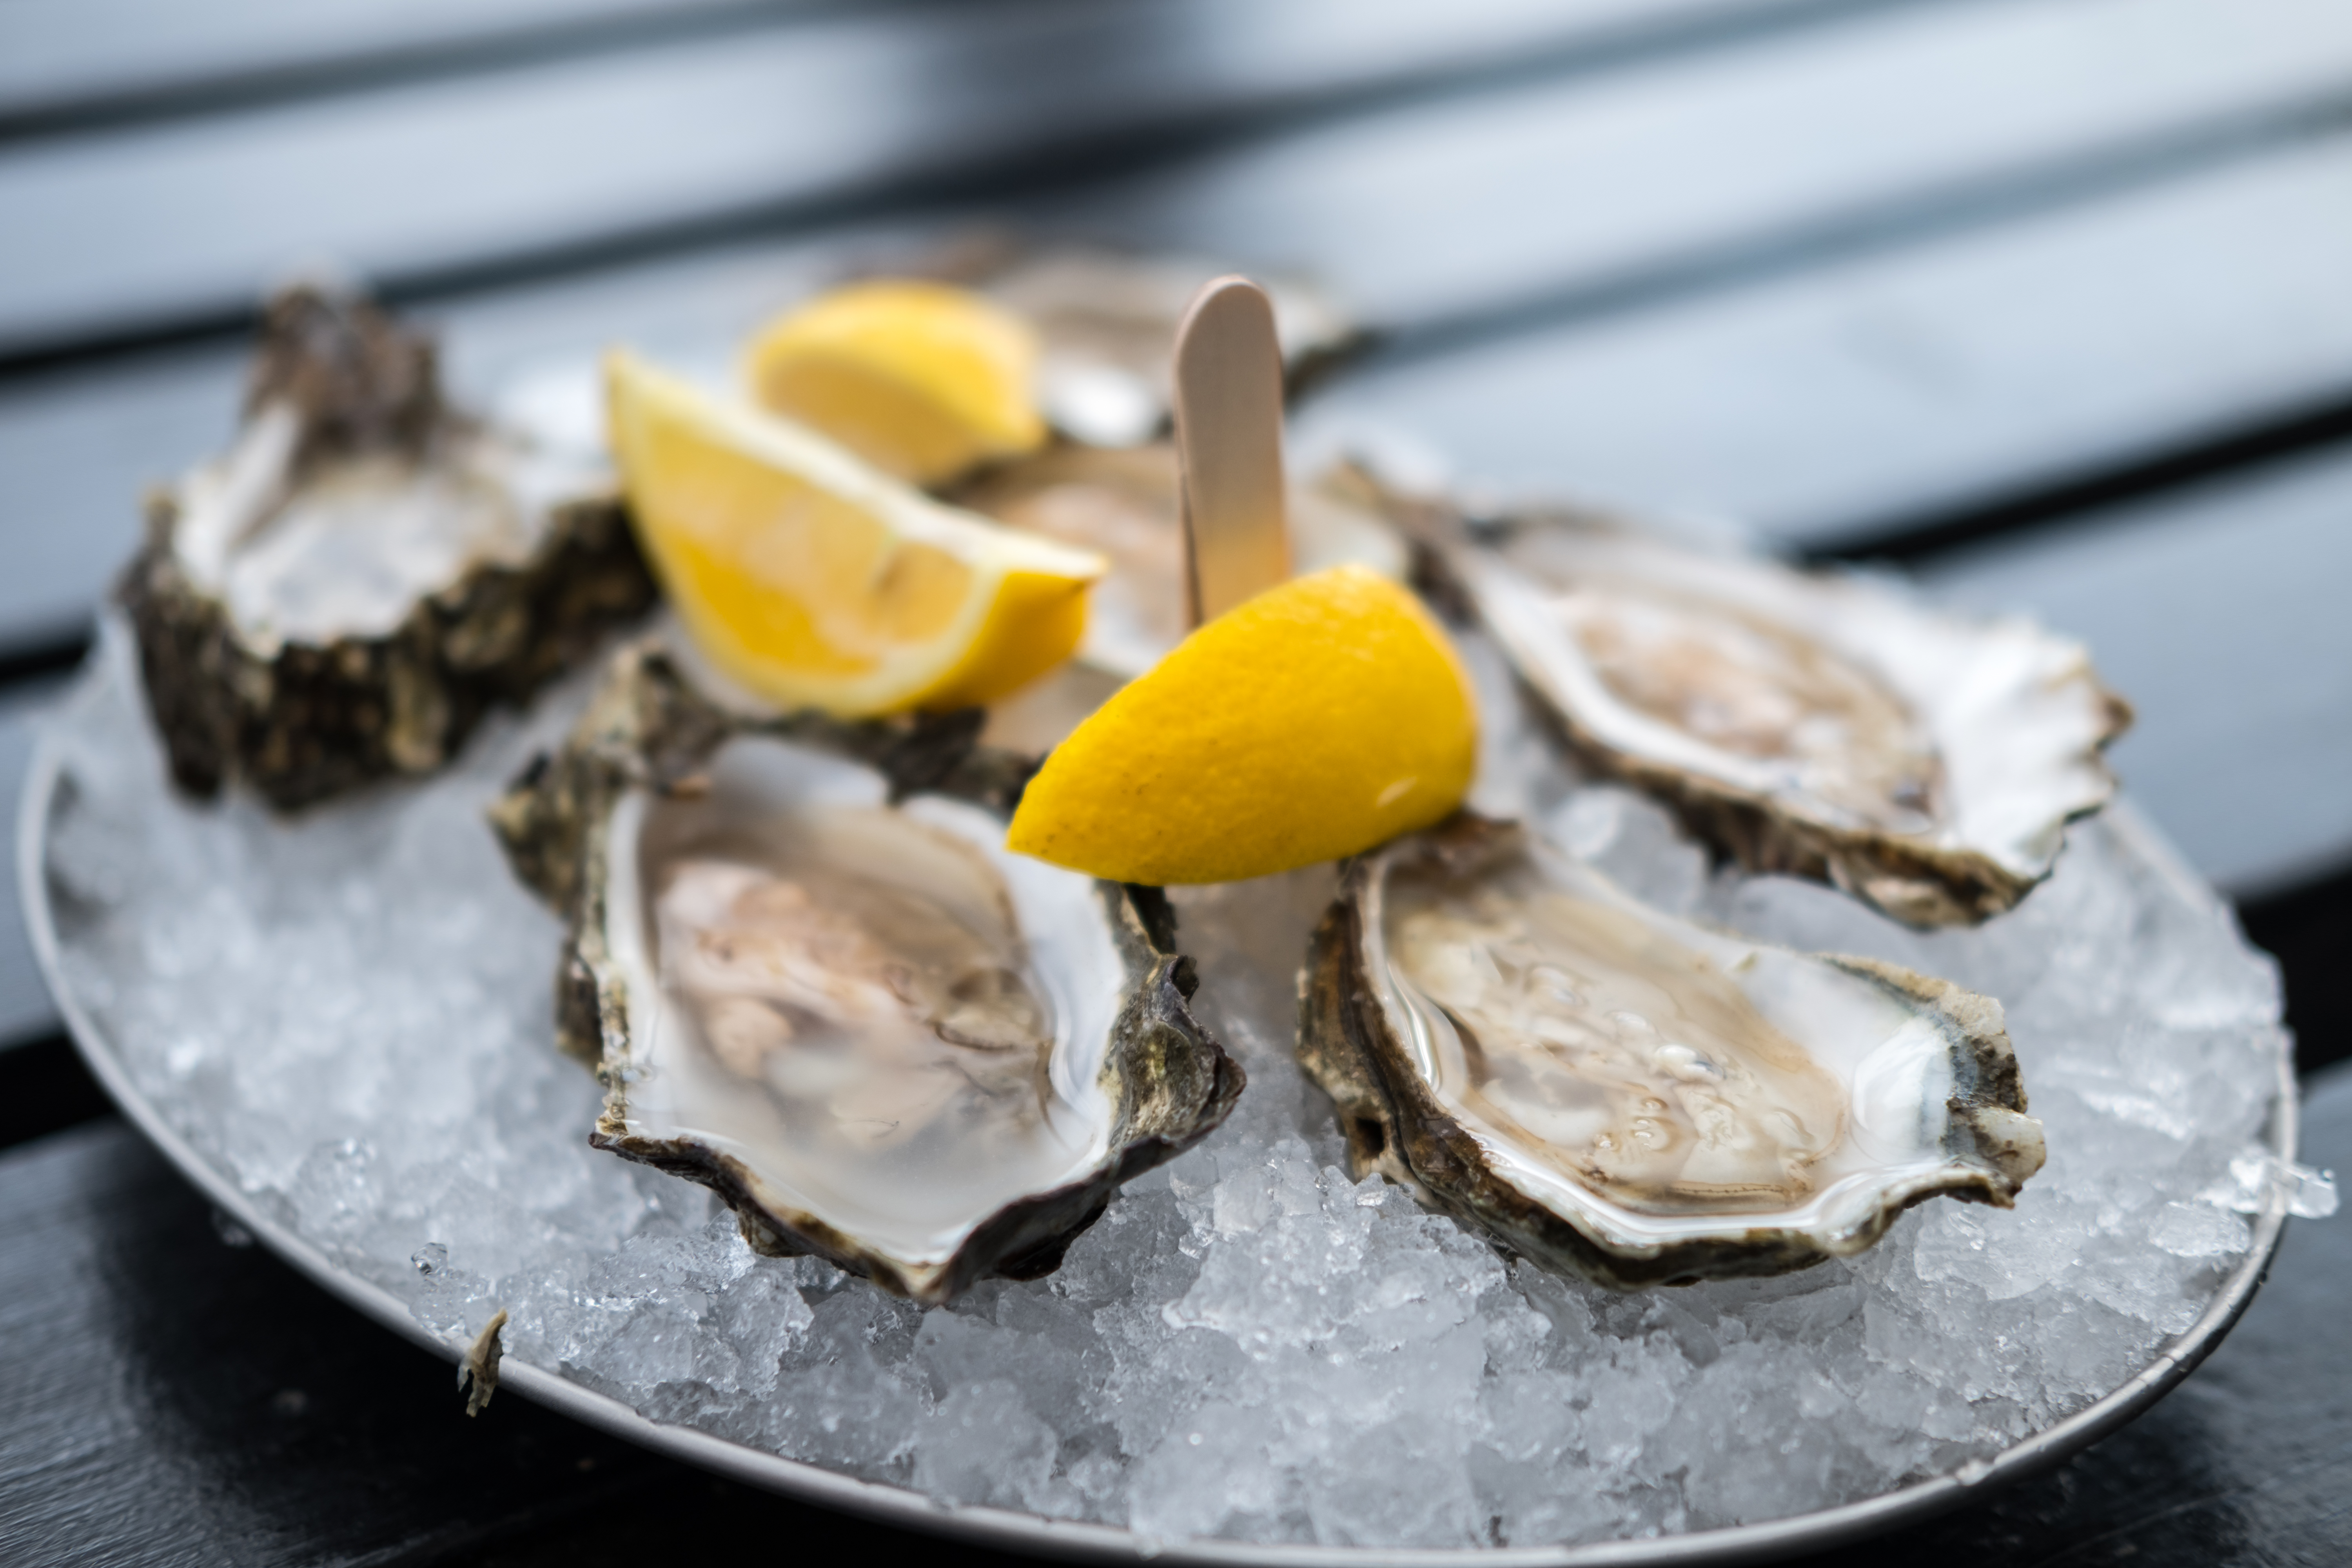 Oysters on a plate of ice